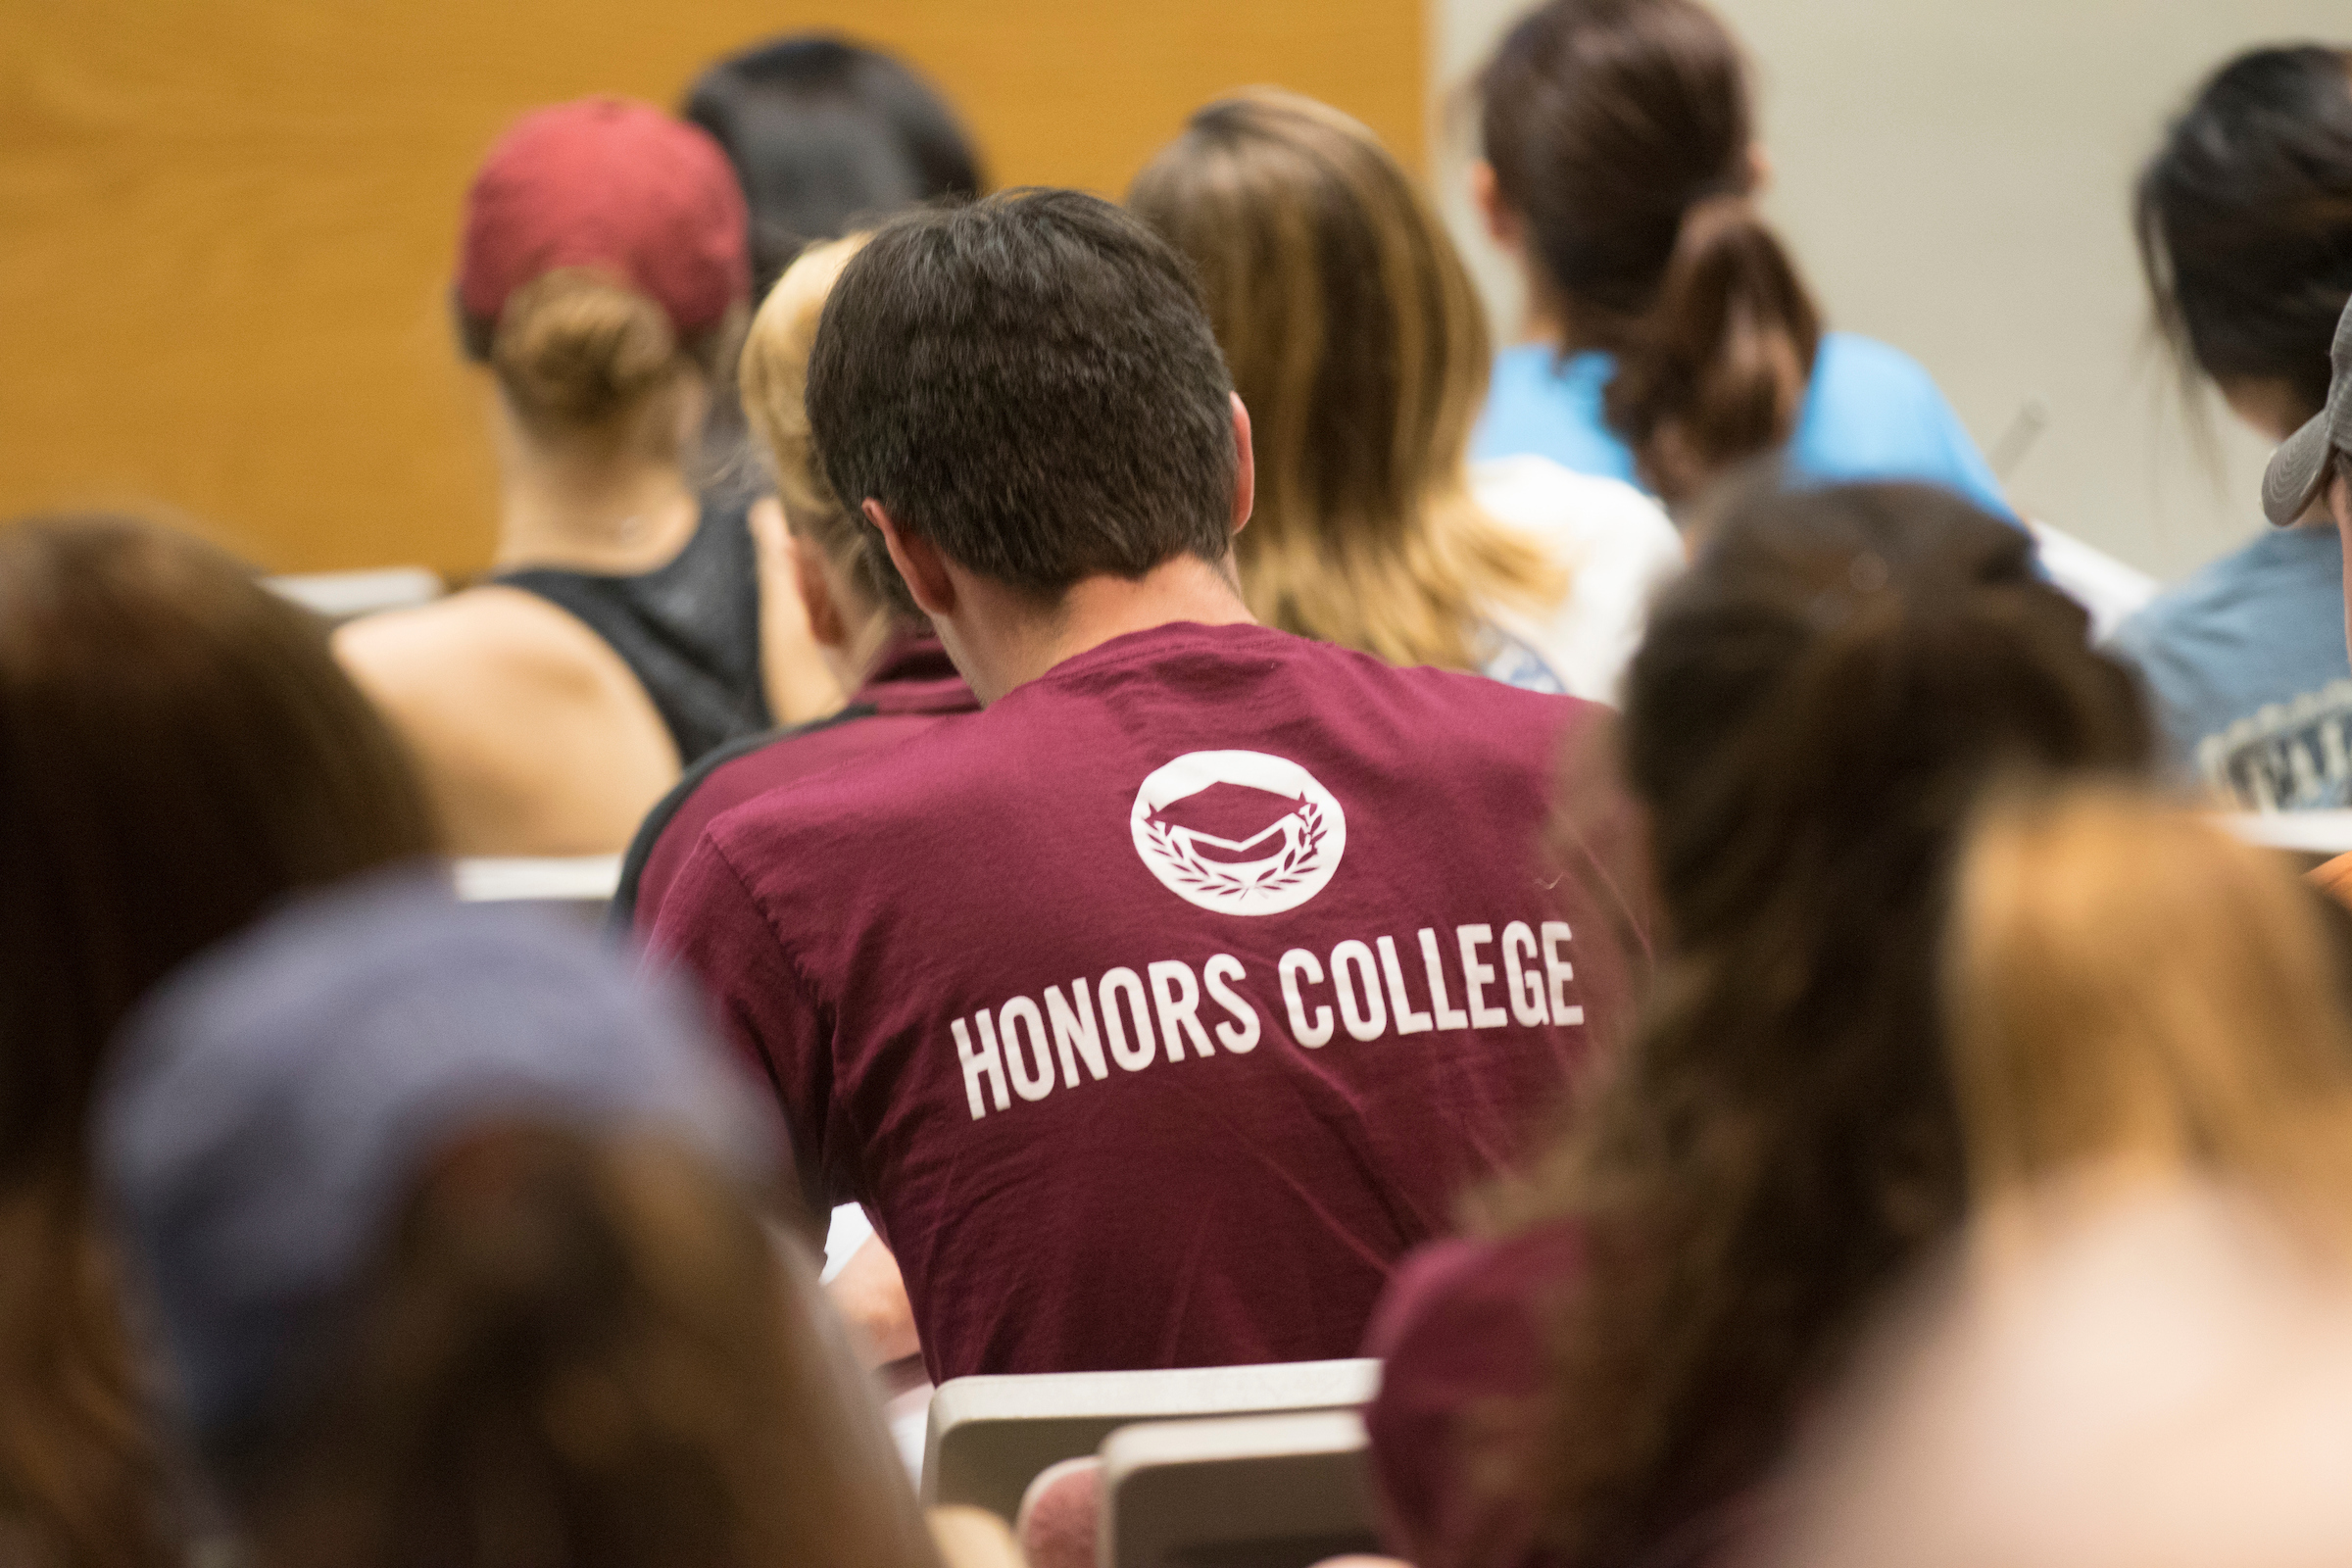 Student wearing honors college shirt in class